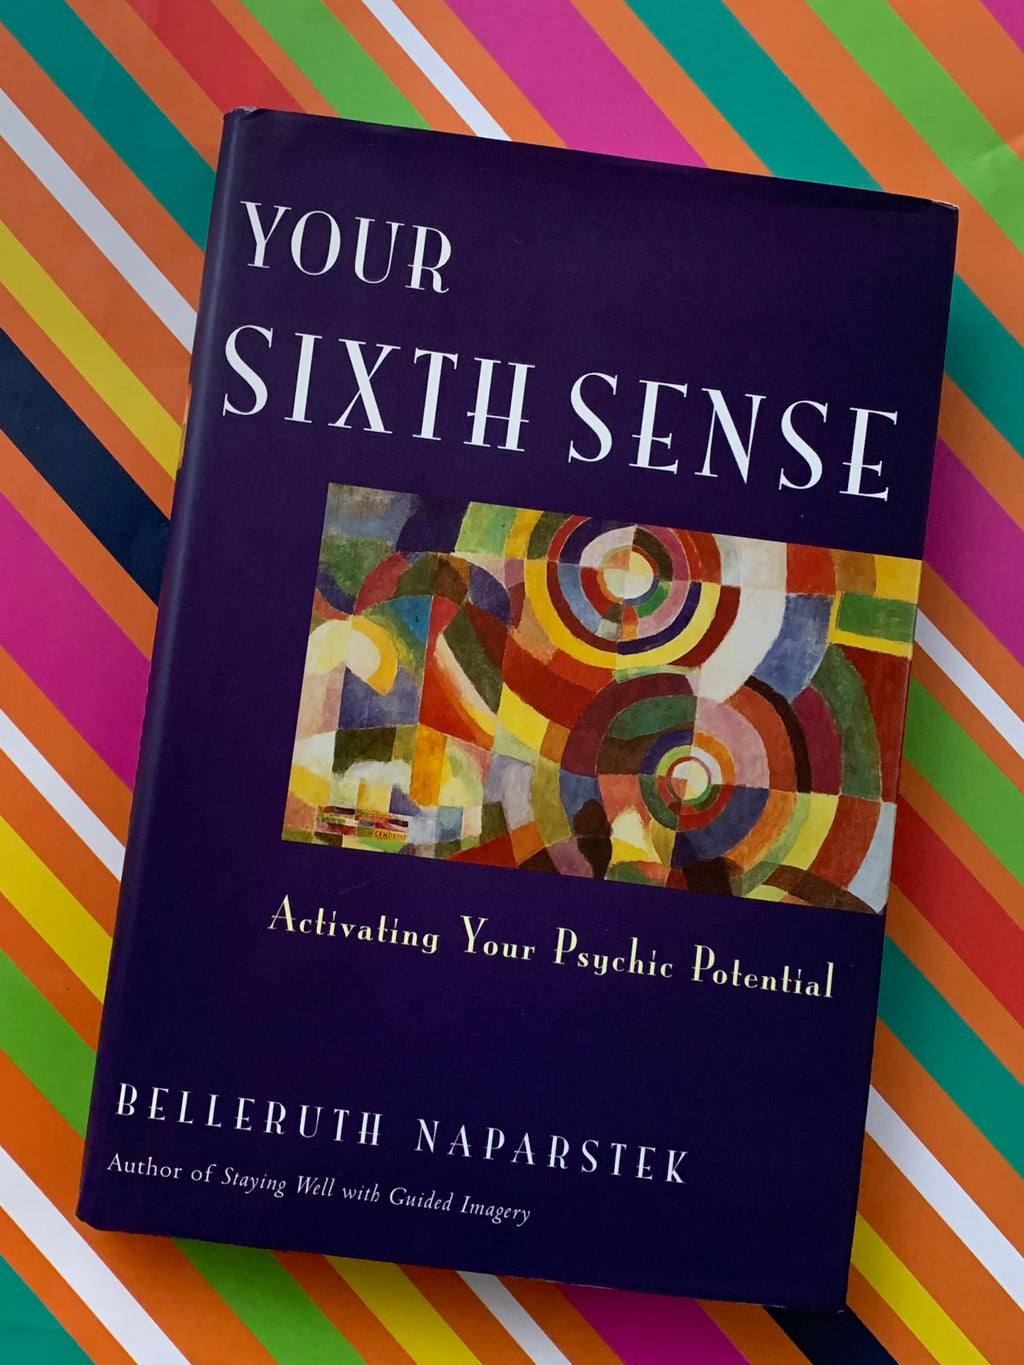 Your Sixth Sense: Activating Your Psychic Potential- By Belleruth Naparstek